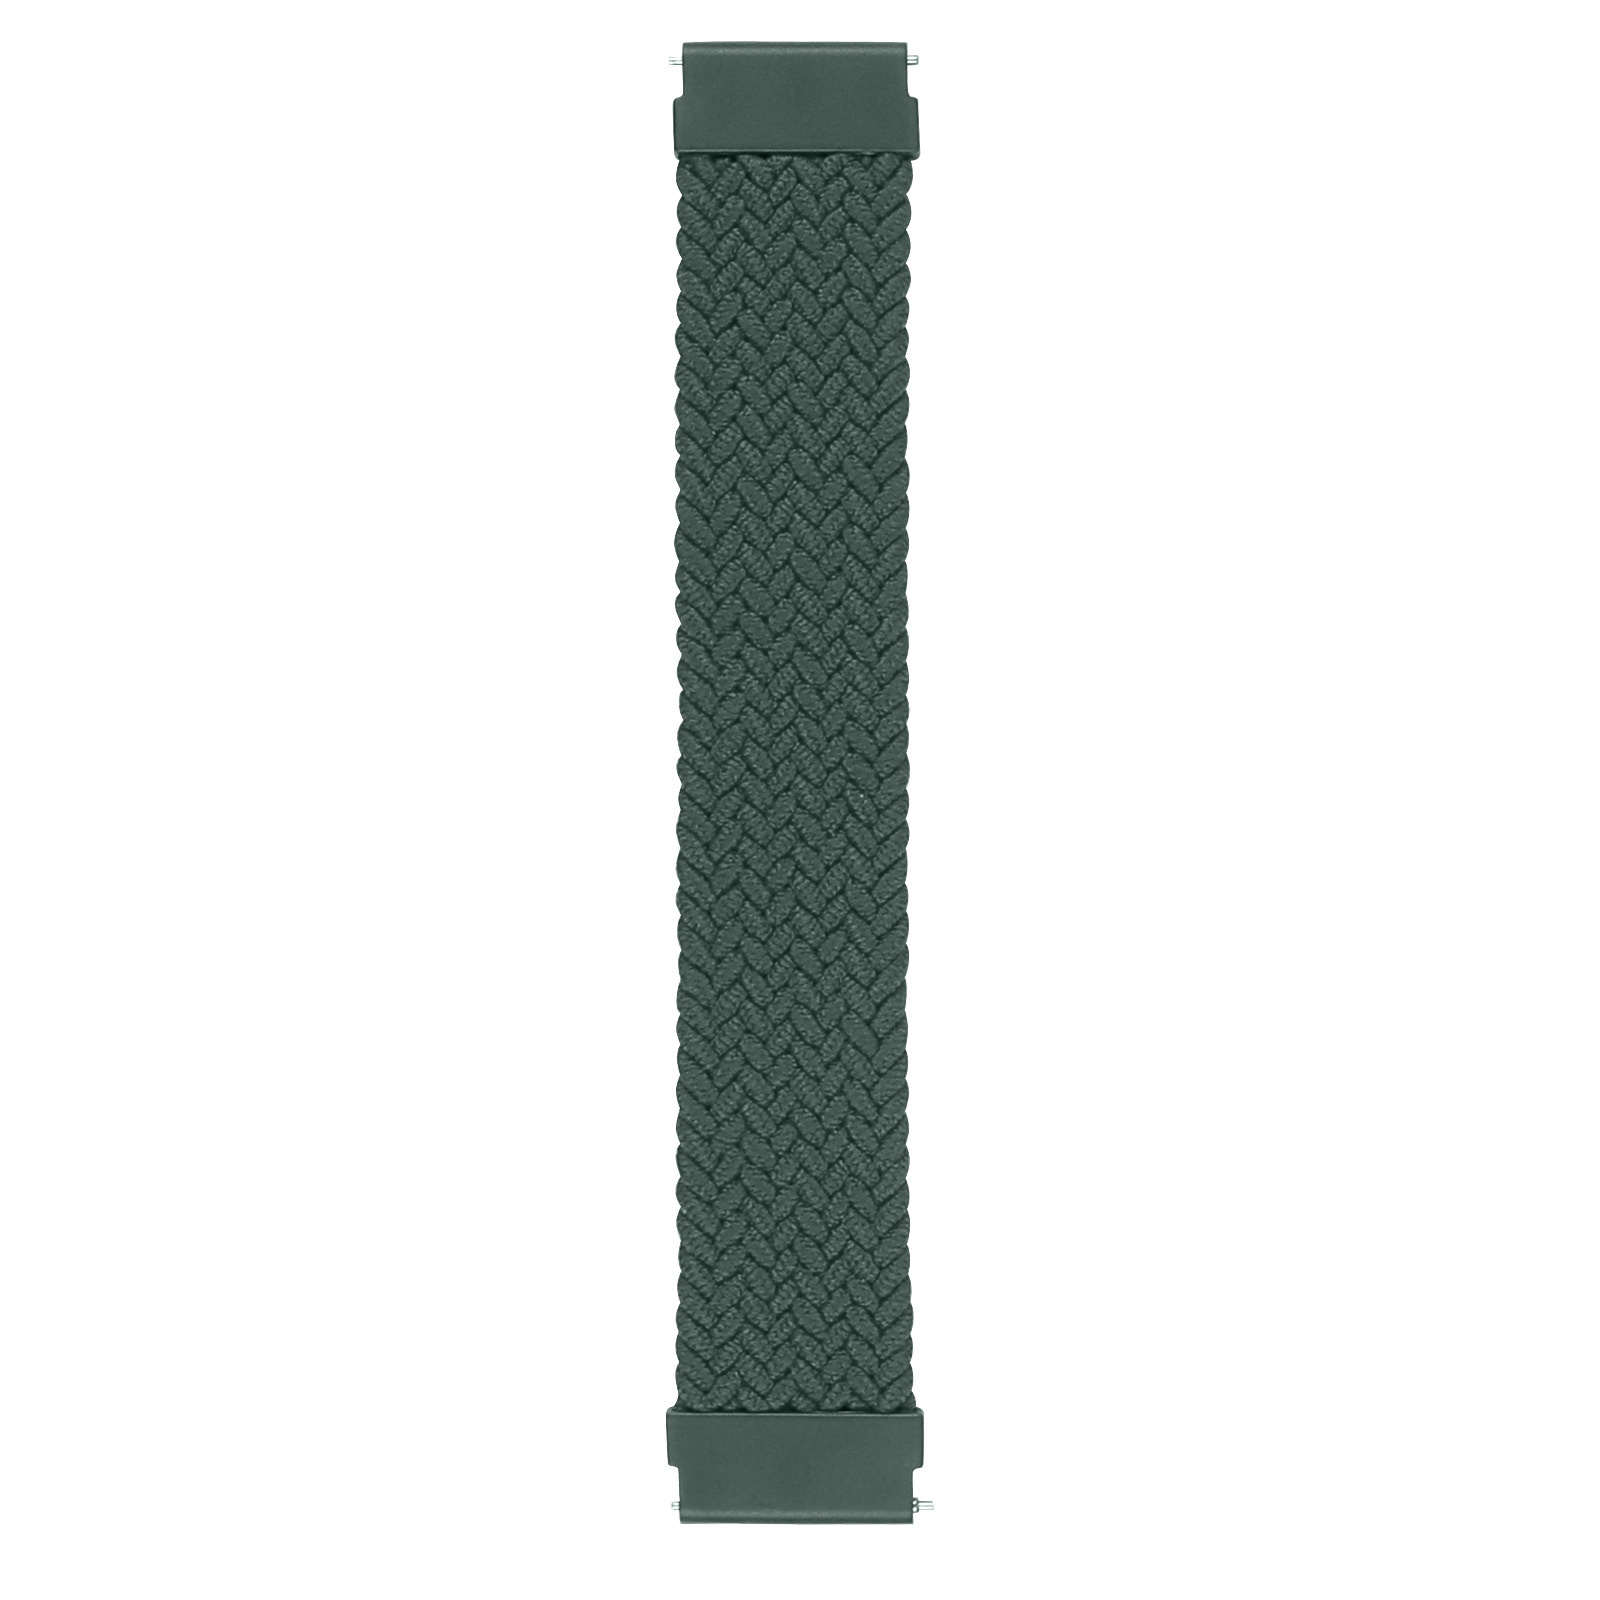 Huawei Watch Gt Nylon Braided Solo Strap - Inverness Green